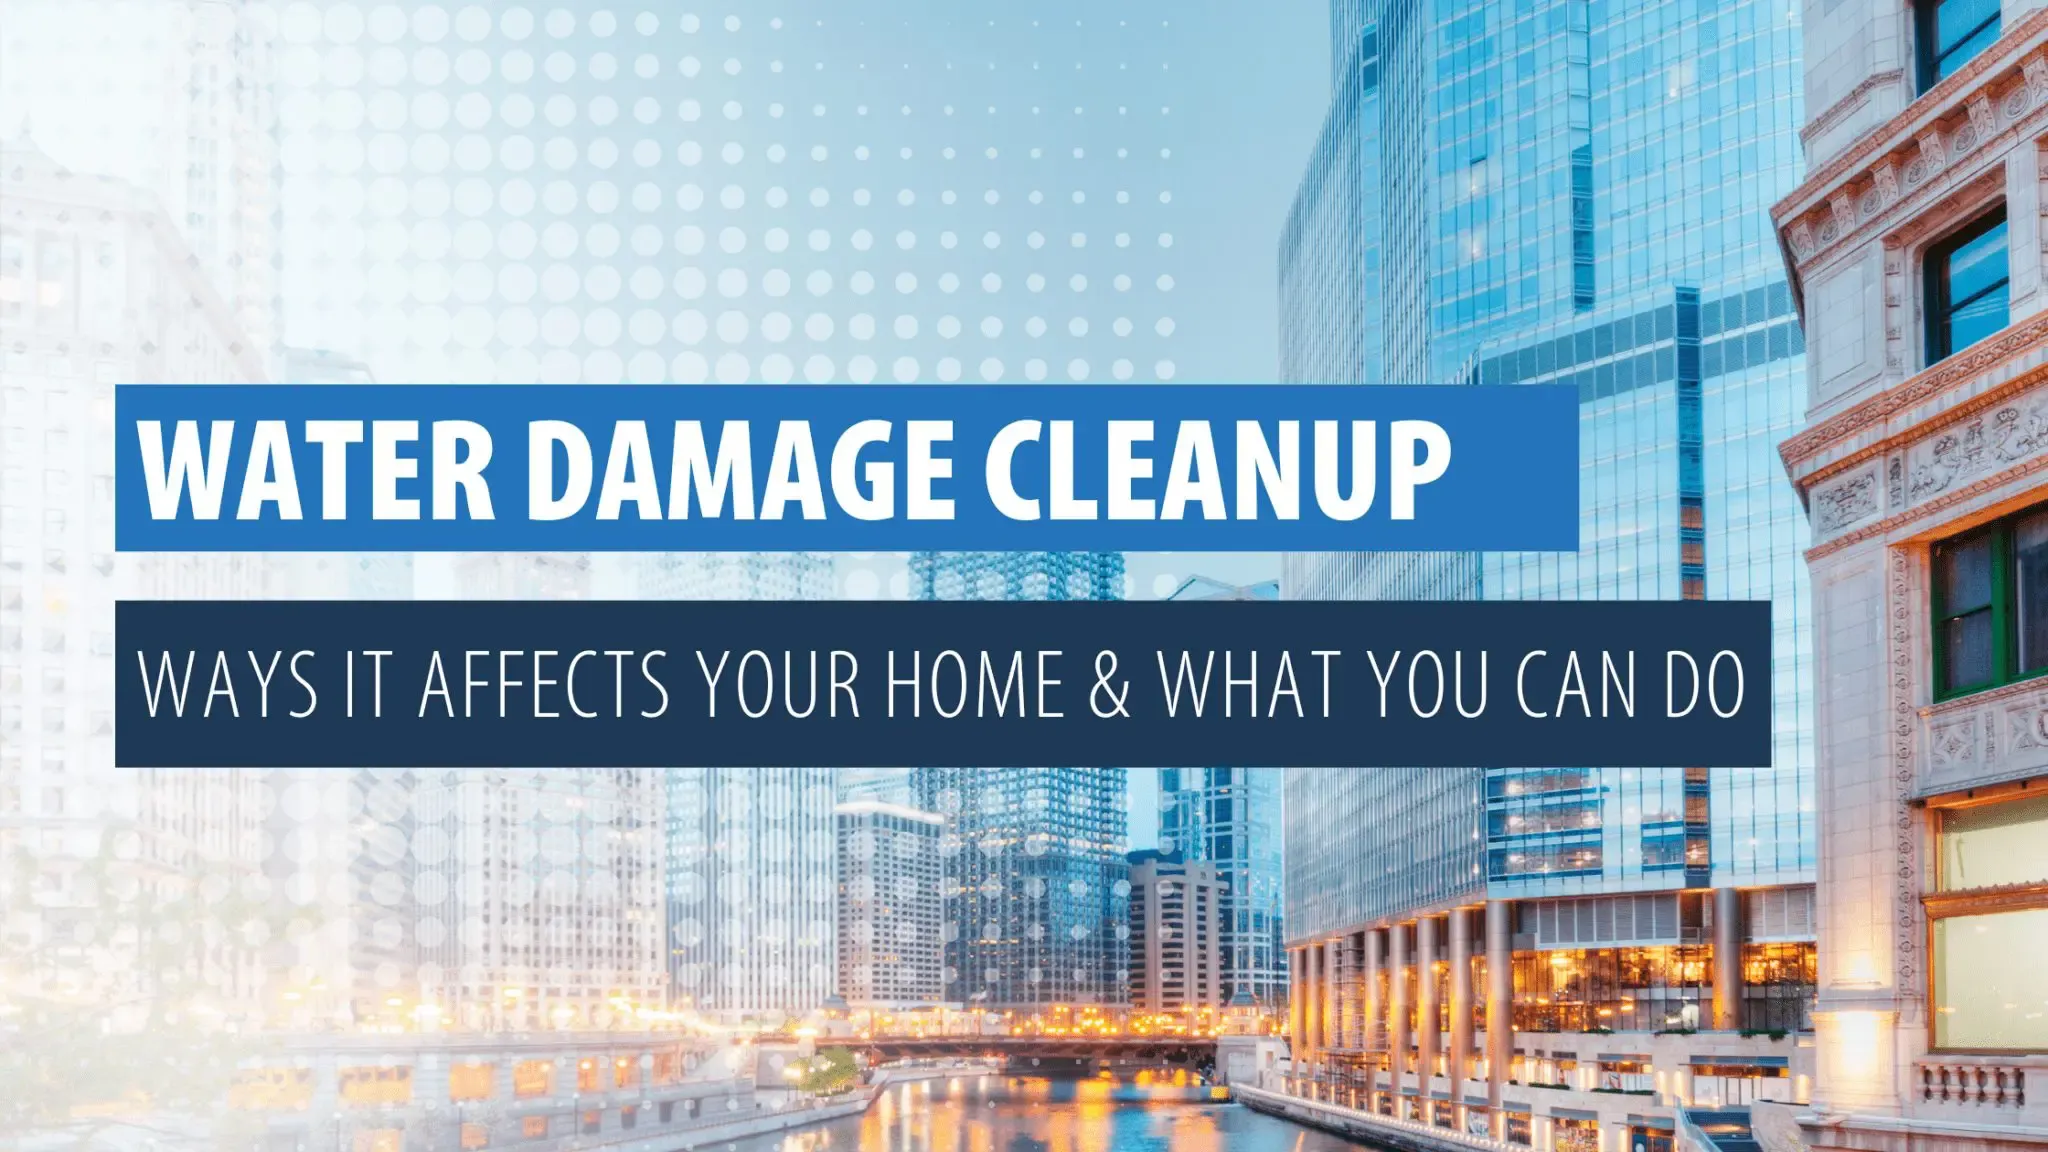 Water Damage Cleanup: All the Ways It Affects Your Home and What You Can Do About It